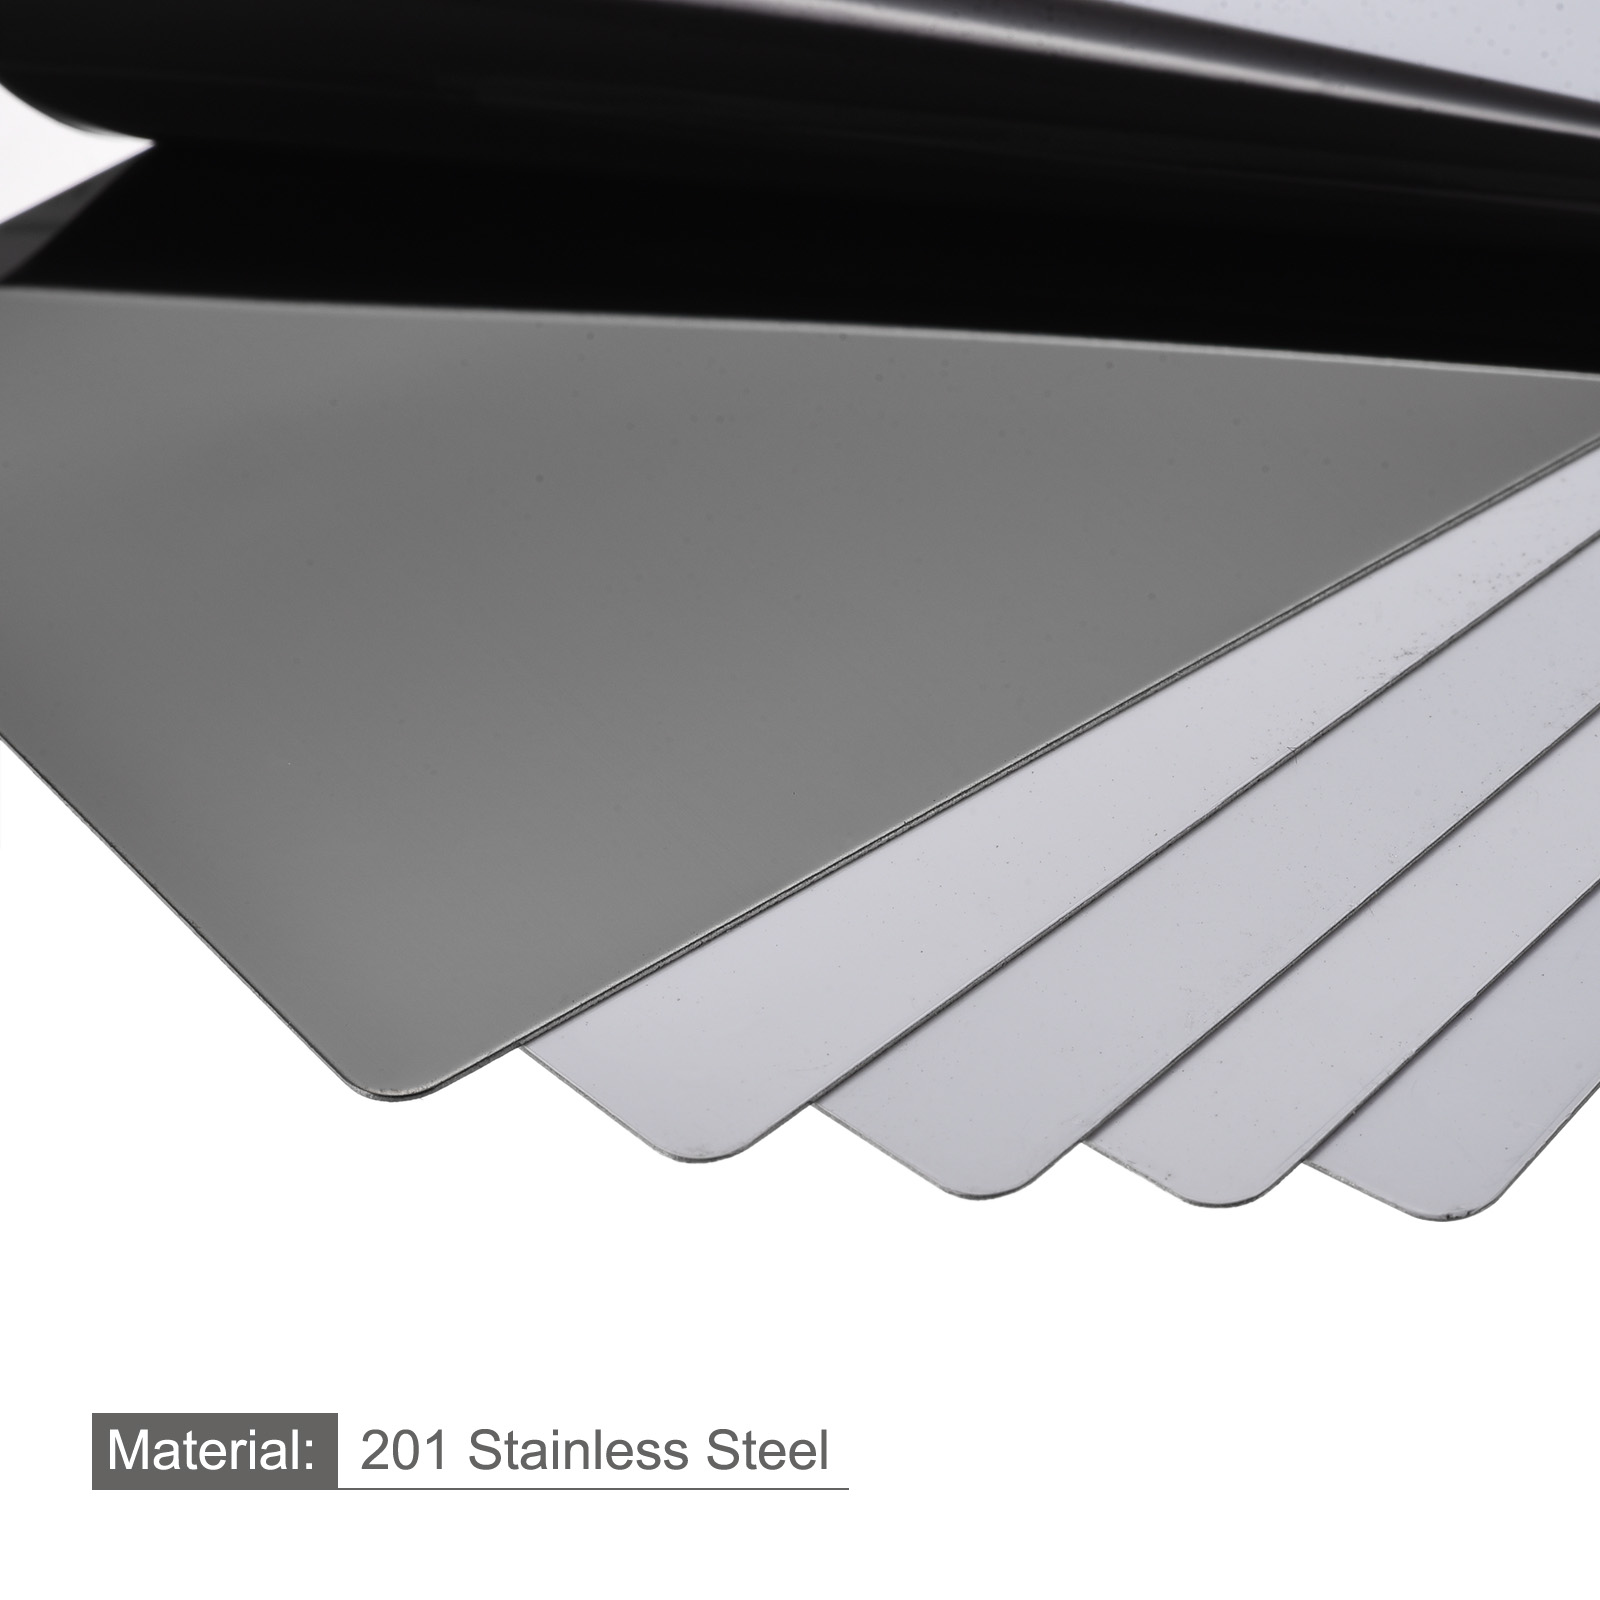 Uxcell 80x50x0.4mm 201 Stainless Steel Polishing Blank Metal Card Dark Gray 10 Pack - image 3 of 6